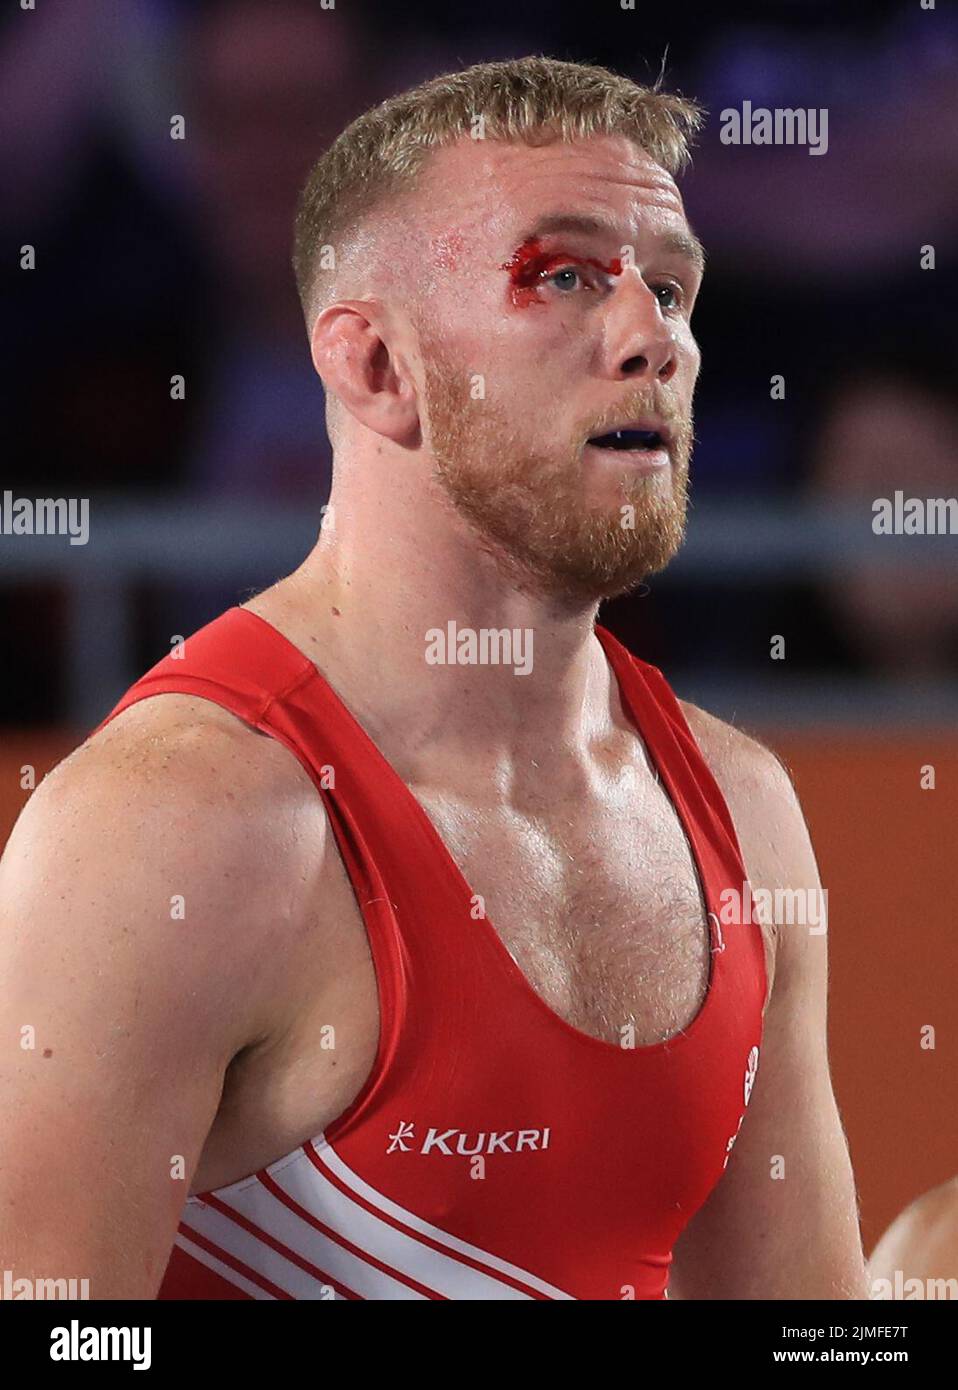 Scotland’s Cameron Nicol appears injured after his match against Pakistan’s Tayab Raza in the Men’s Freestyle 97kg Quarter Final at the Coventry Arena on day nine of the 2022 Commonwealth Games. Picture date: Saturday August 6, 2022. Stock Photo